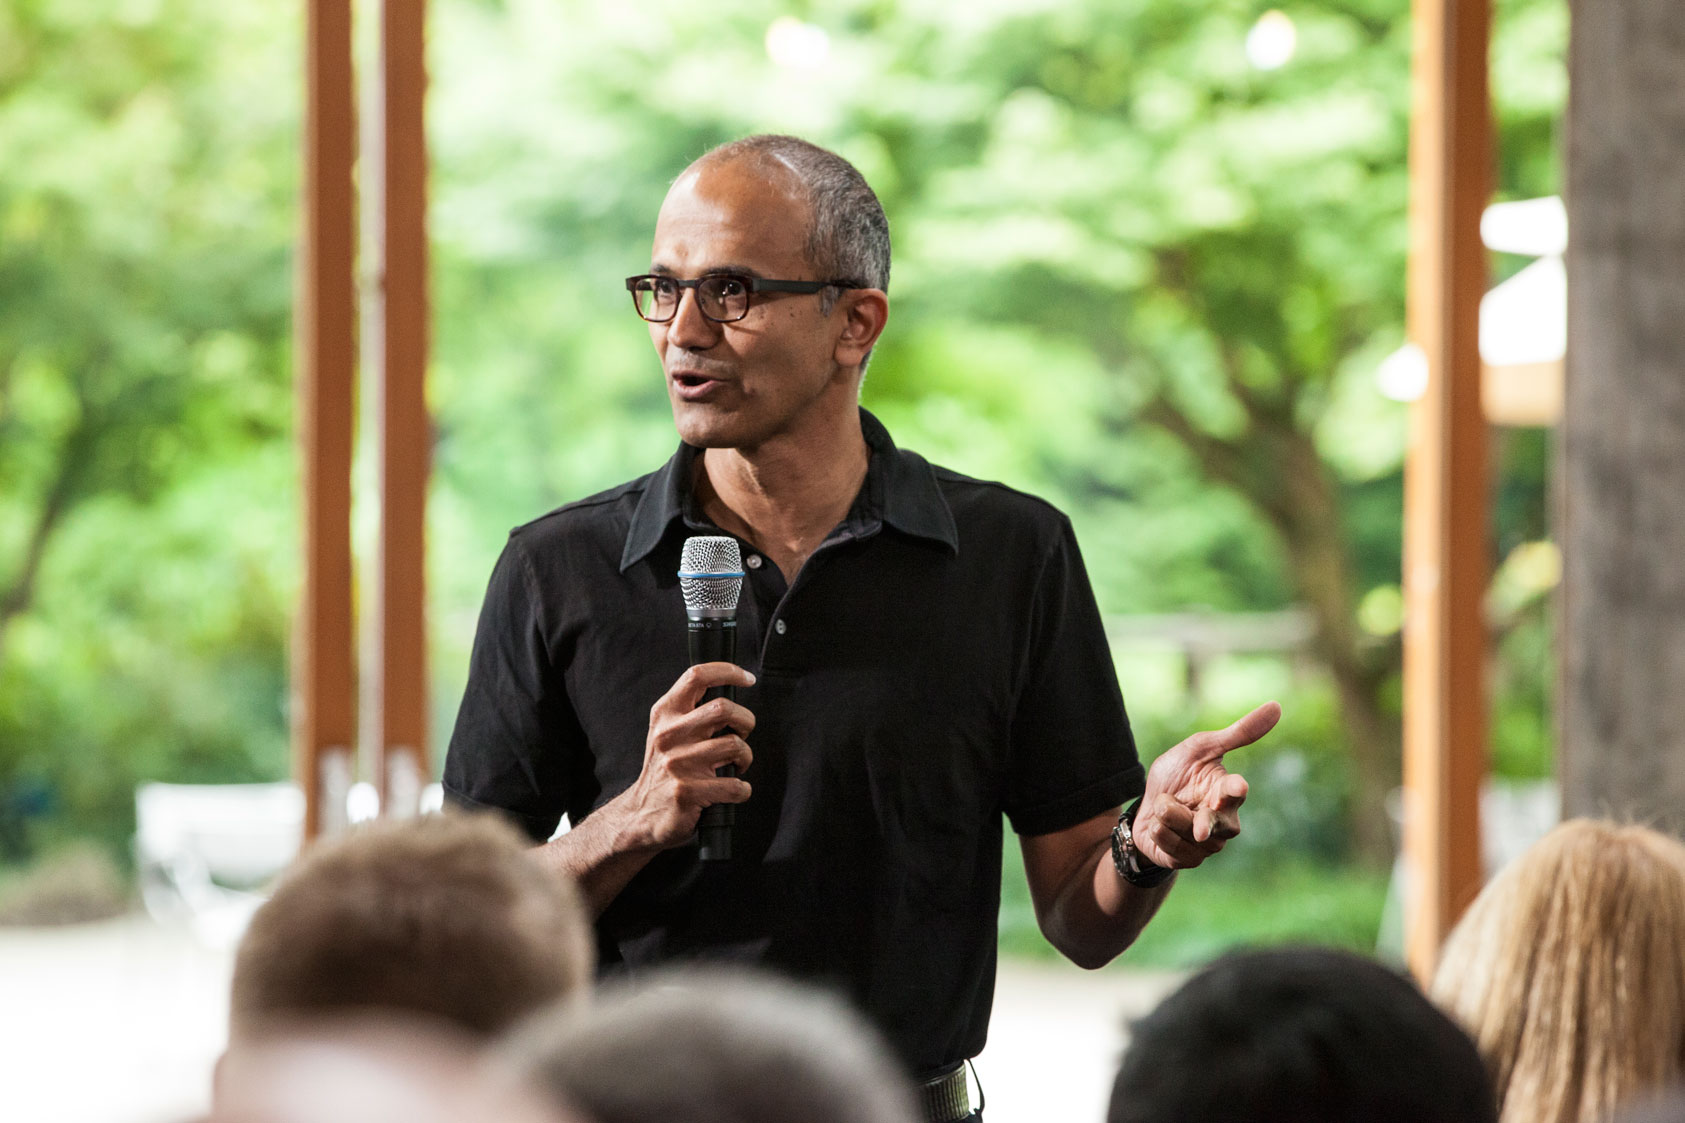 Satya Nadella, executive vice president, Cloud and Enterprise, addresses employees during the One Microsoft Town Hall event July 11, 2013. (Microsoft)